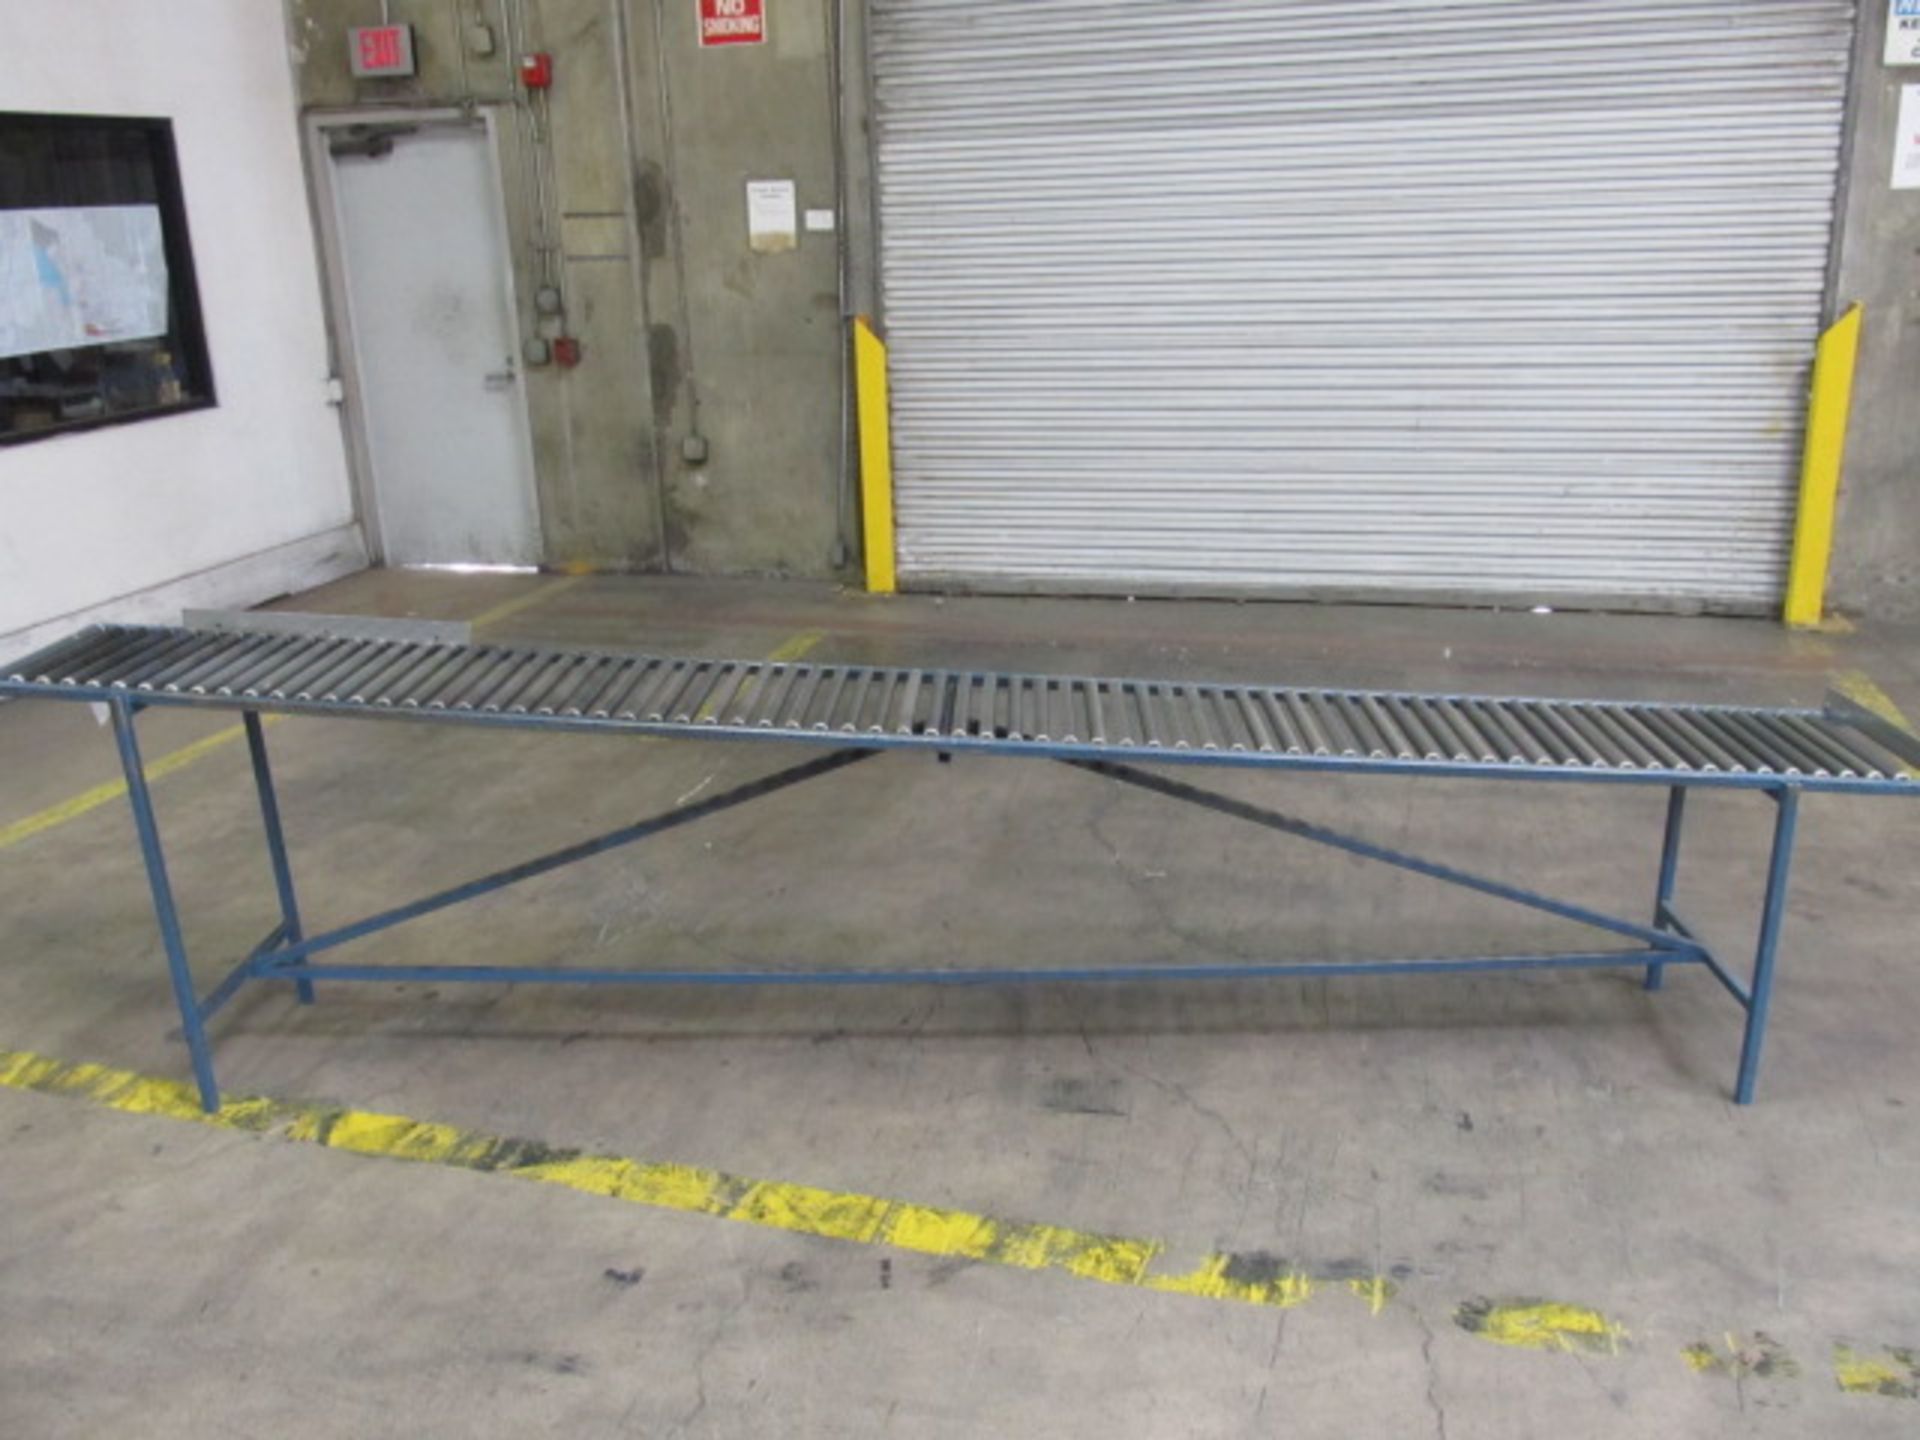 Stationary Conveyor On Stands, Measures Approx. 9Ft.L x 18in.W With Approx. 30 Degree Angle. Asset